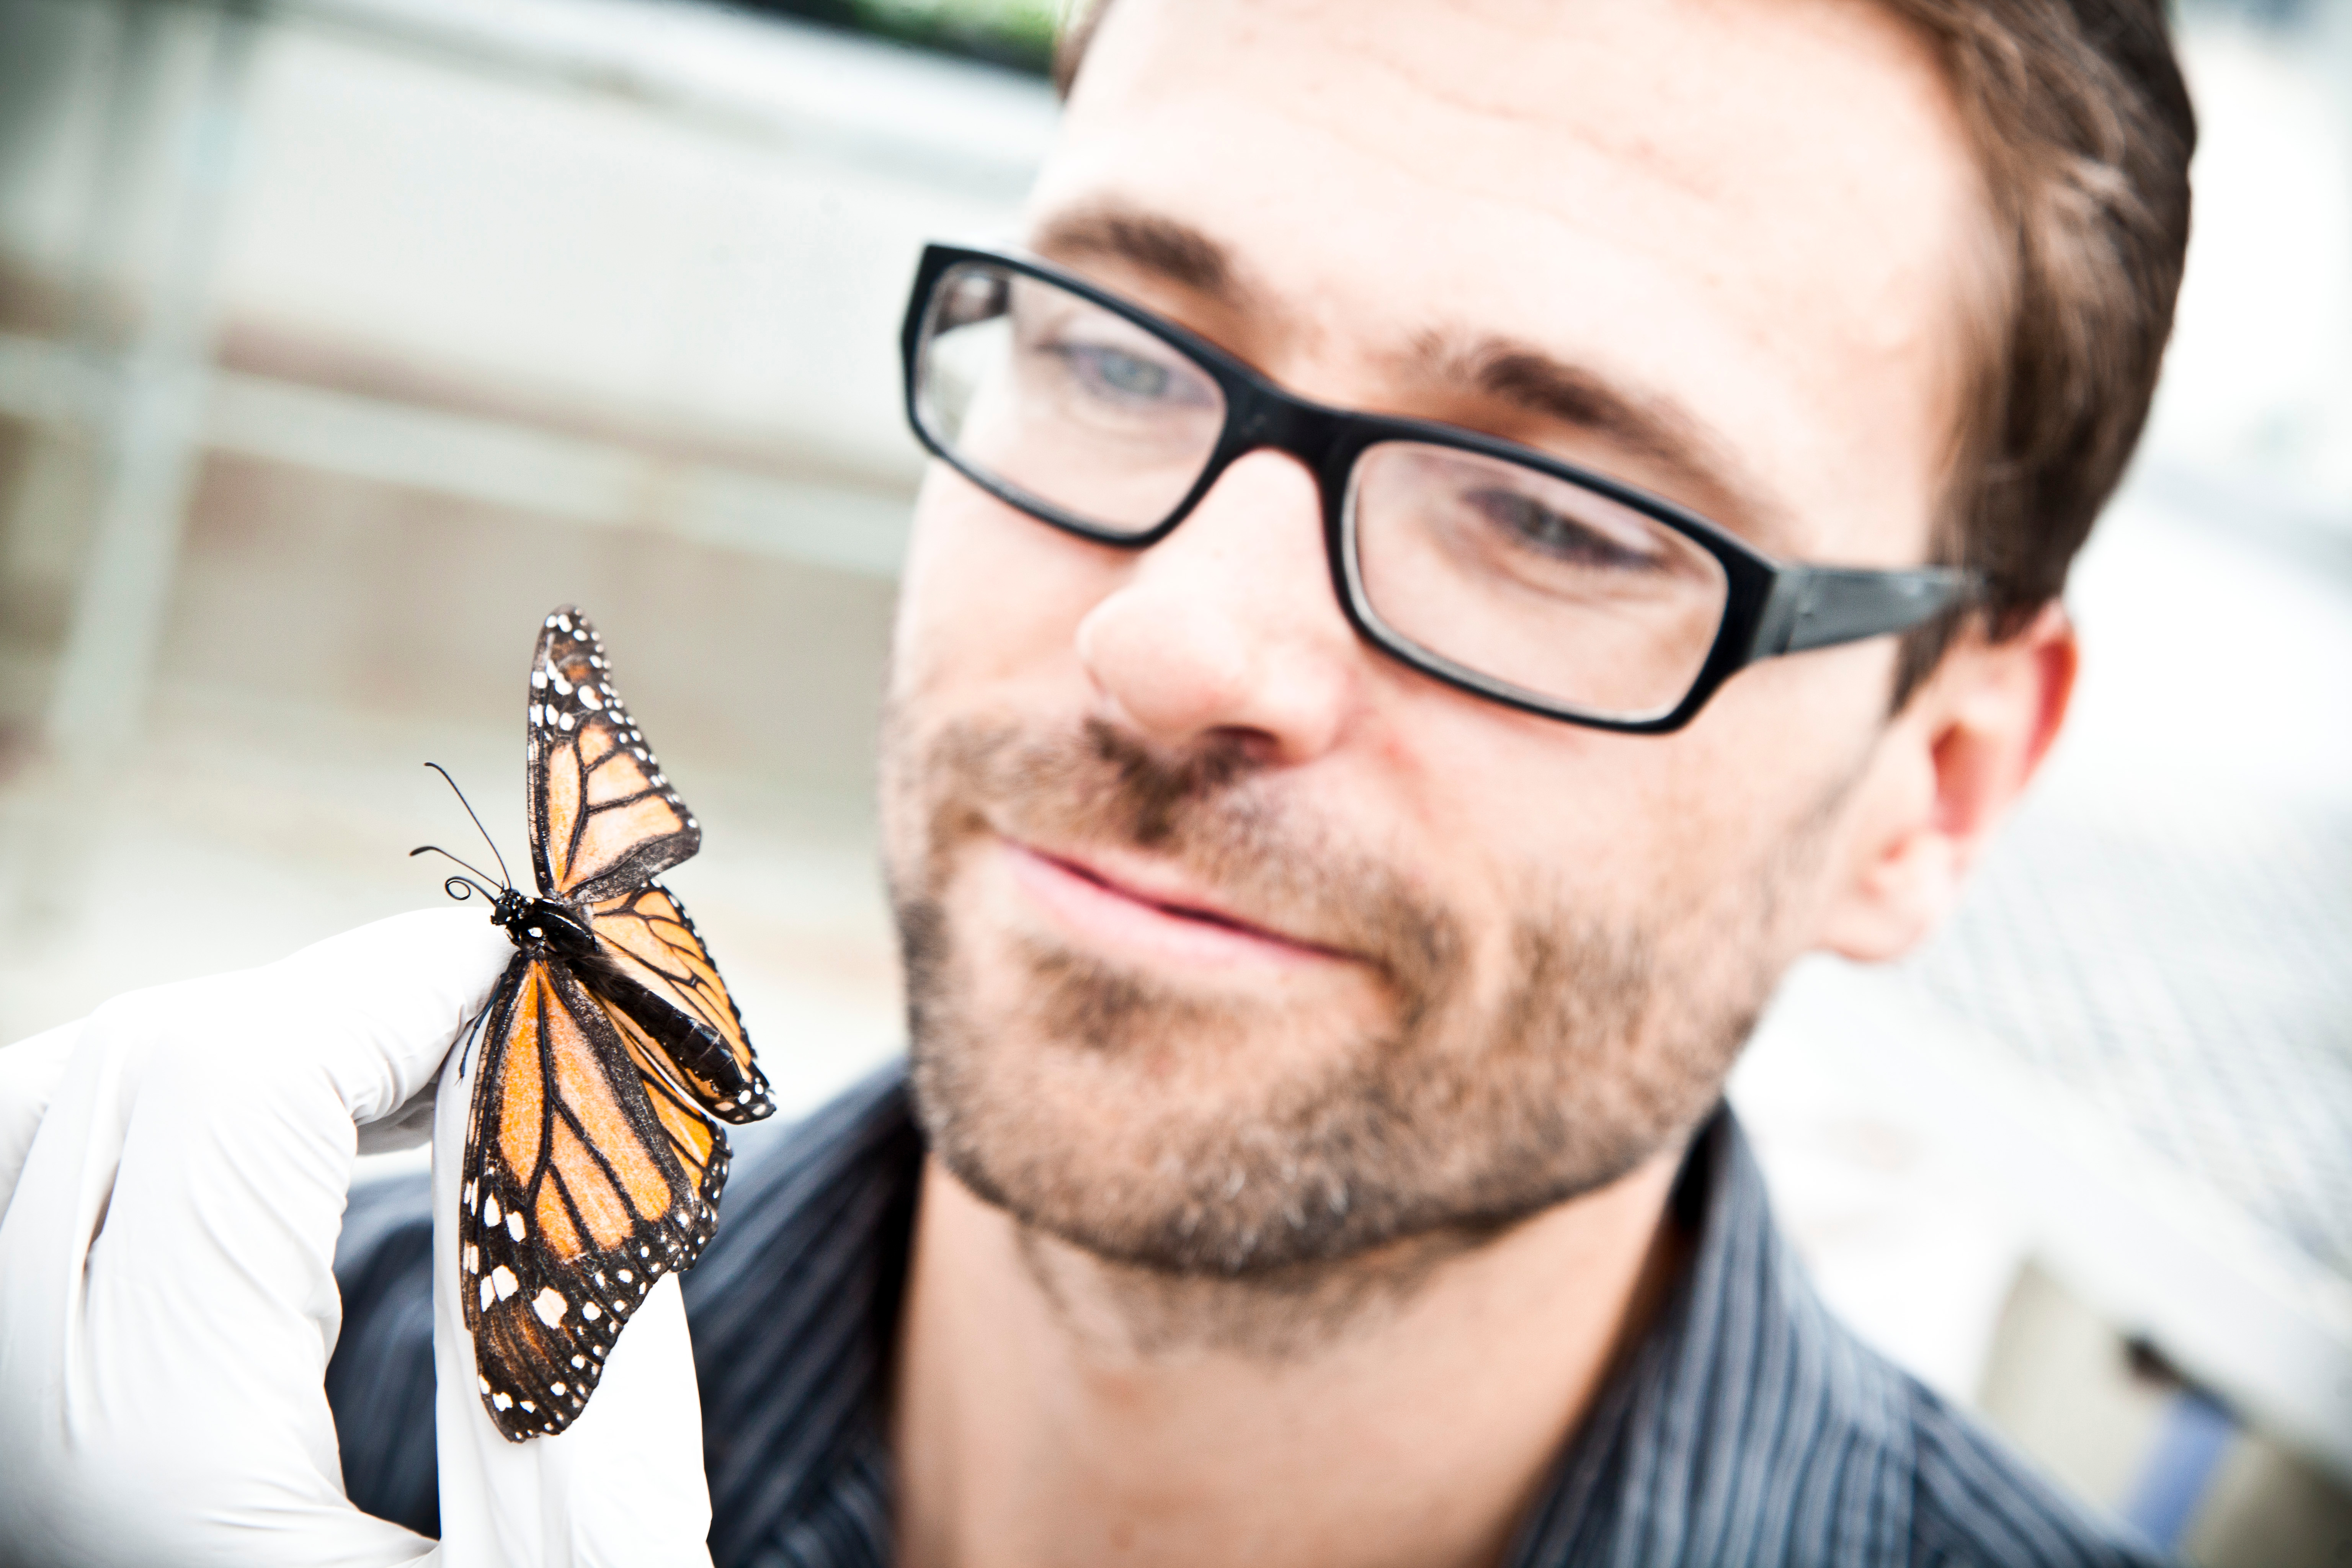 Biologist Jaap de Roode studies the Monarch butterfly's ability to use medicinal plants. Photo: Courtesy of Jaap de Roode 